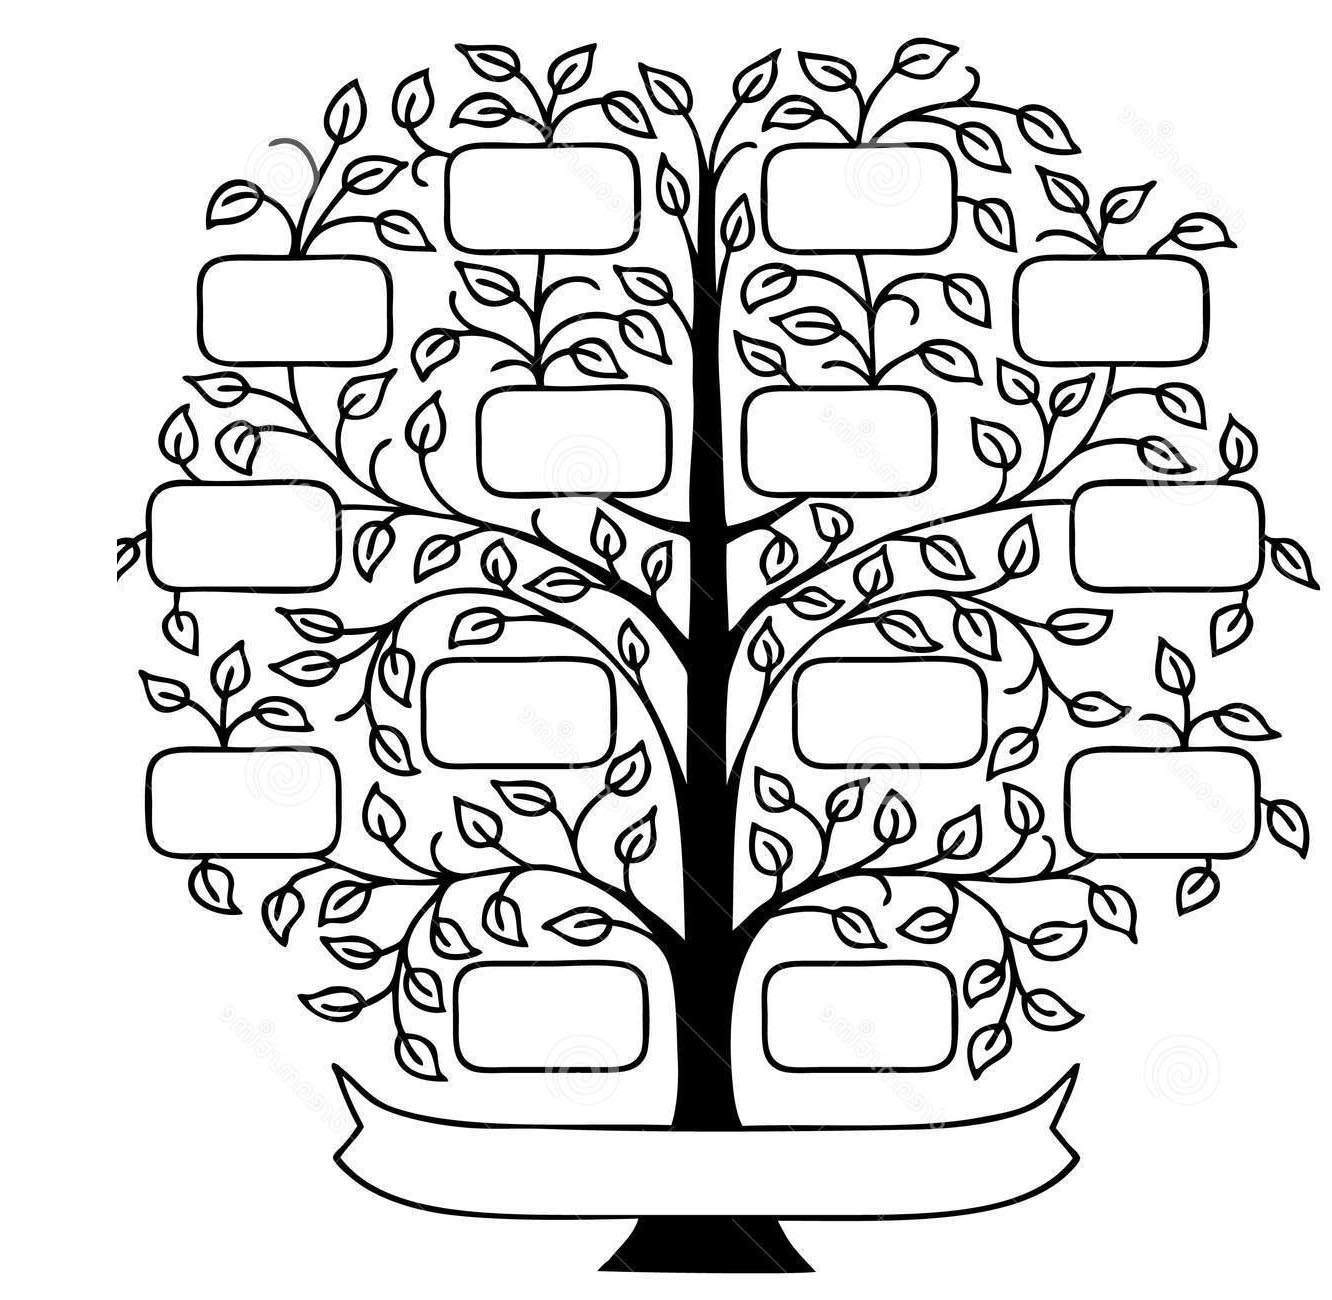 Family tree clipart black and white clipart images gallery